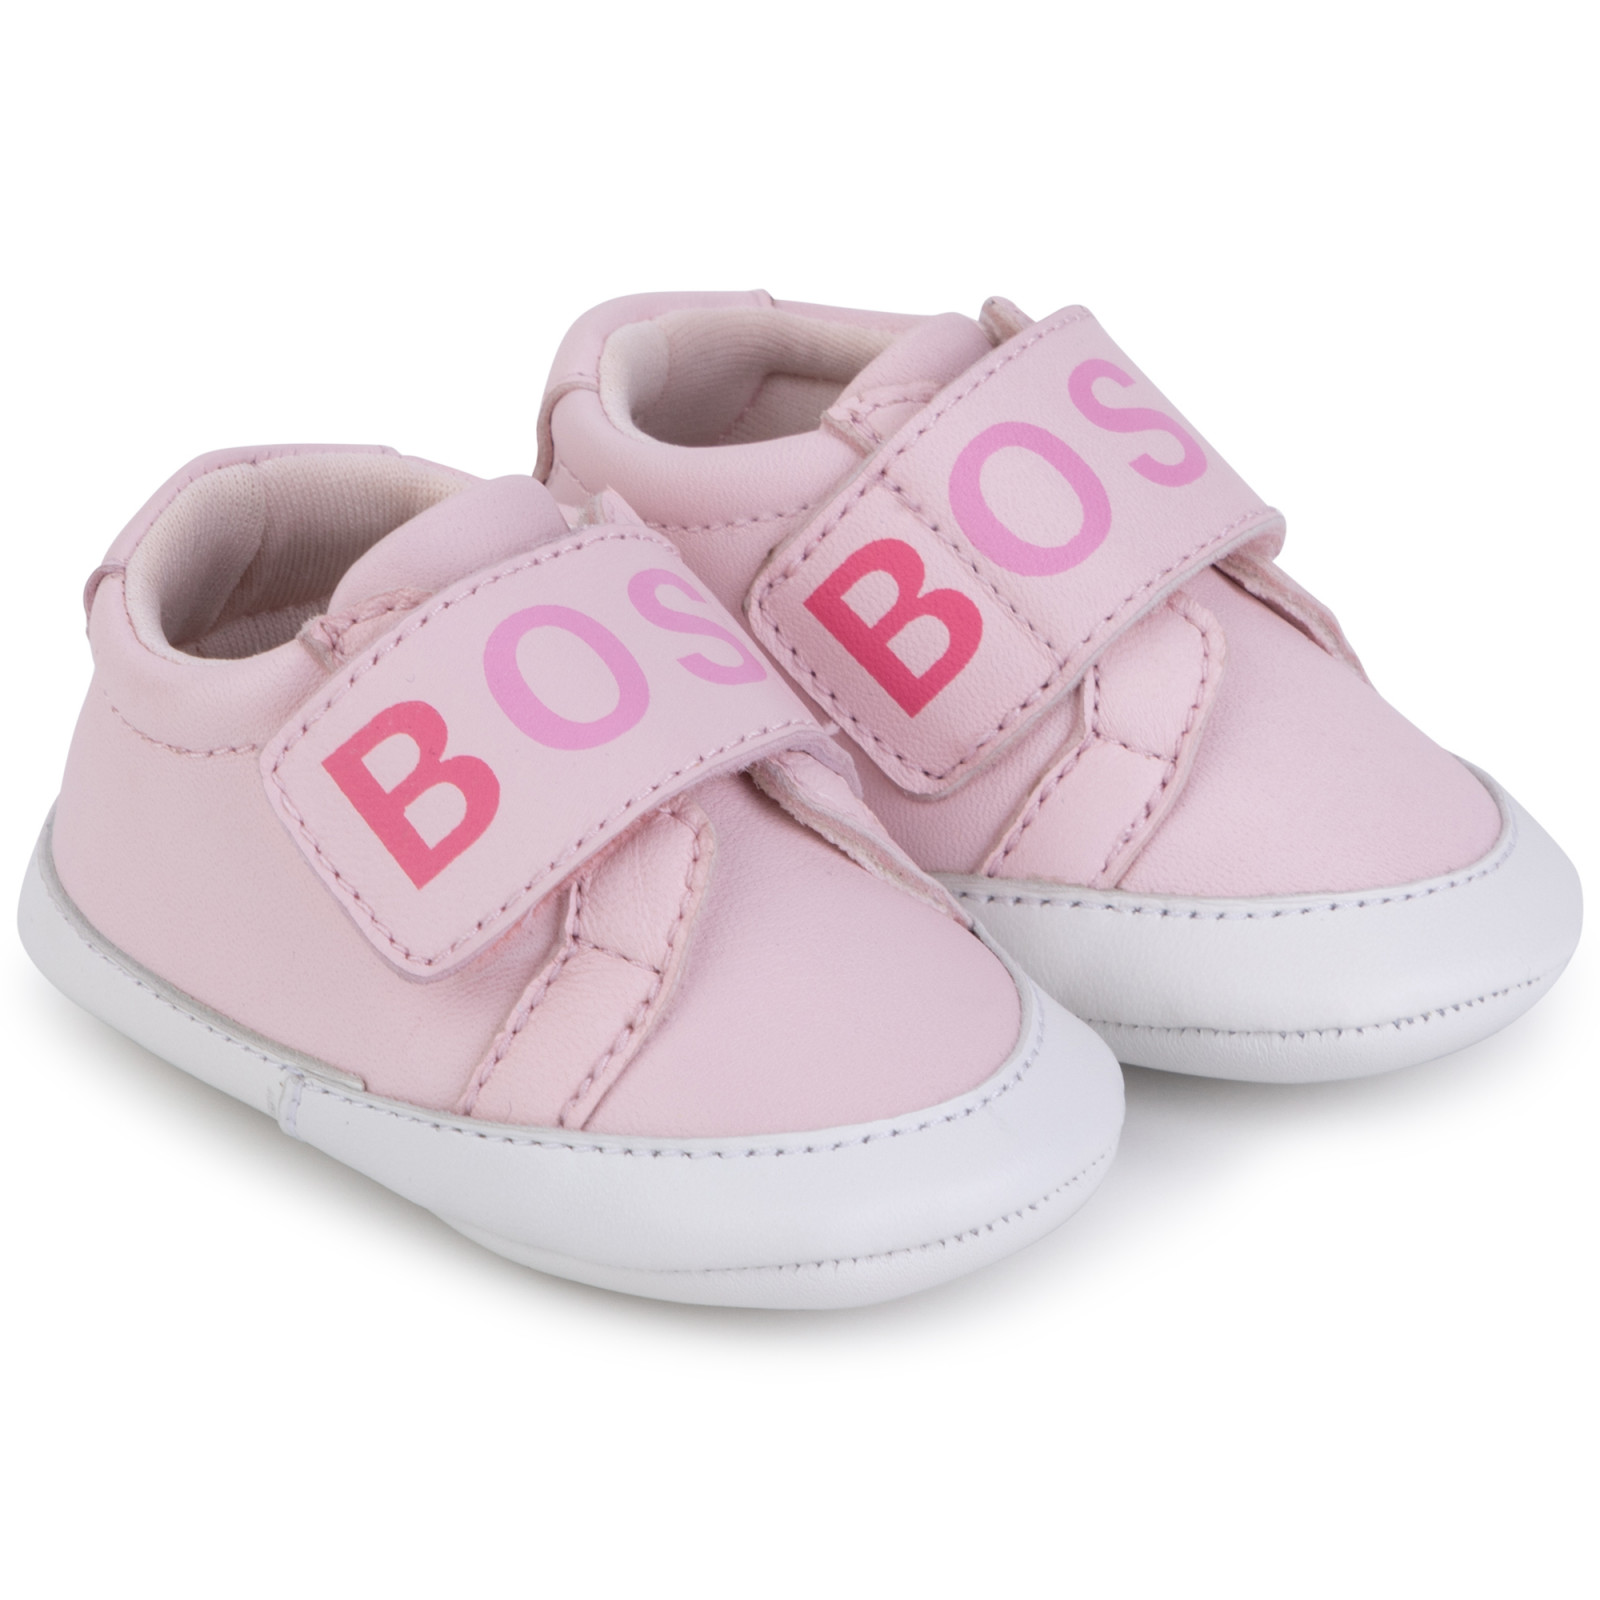 BOSS CHAUSSONS BABY PINK 16-19